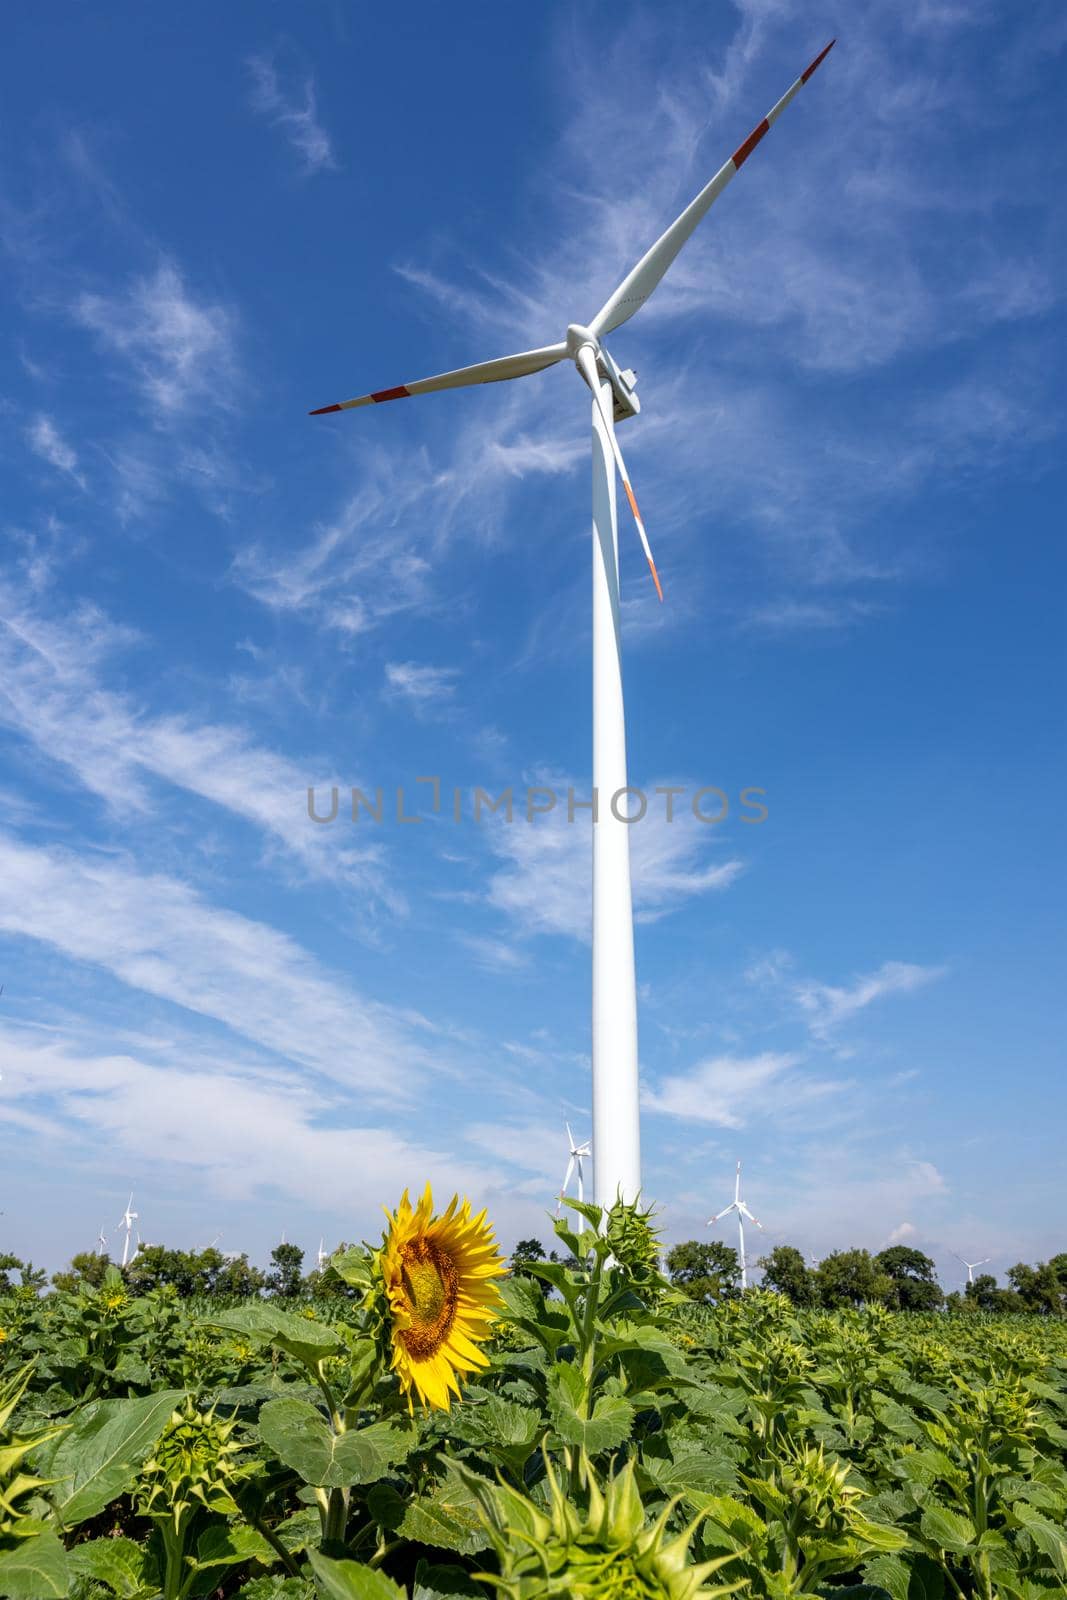 Wind turbine with a sunflower seen in Germany